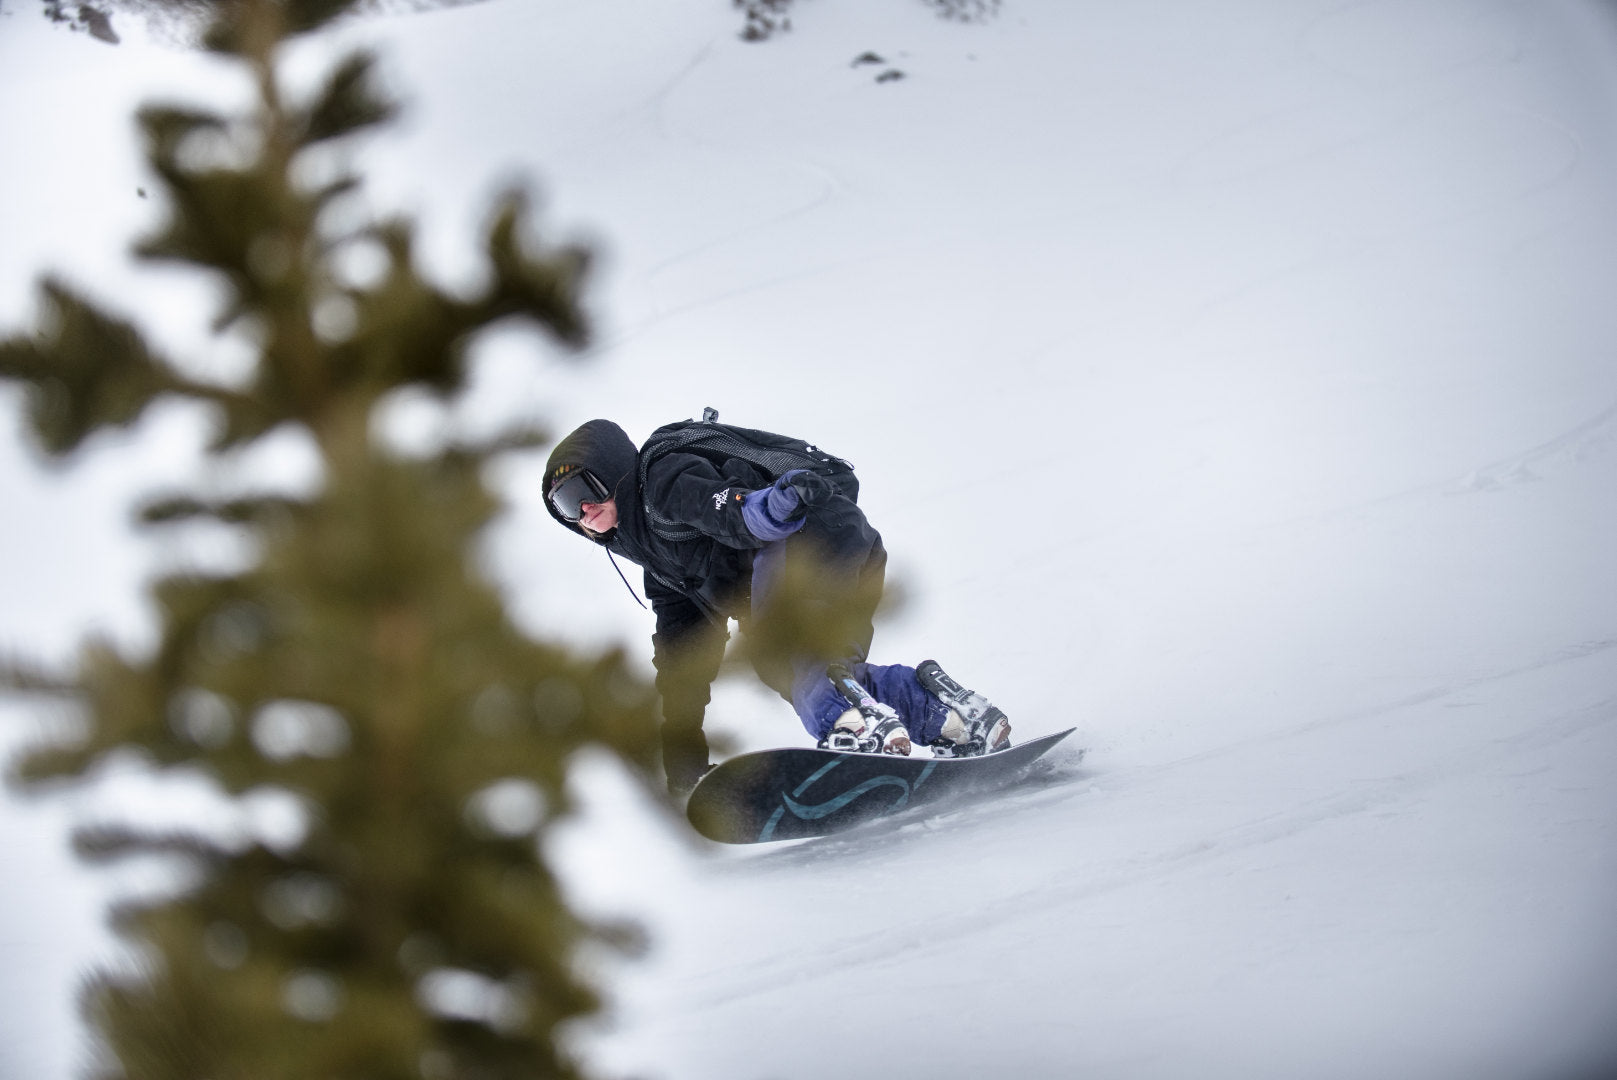 The Absolute Guide to Buying a Snowboard Stomp Pad or Traction Mat